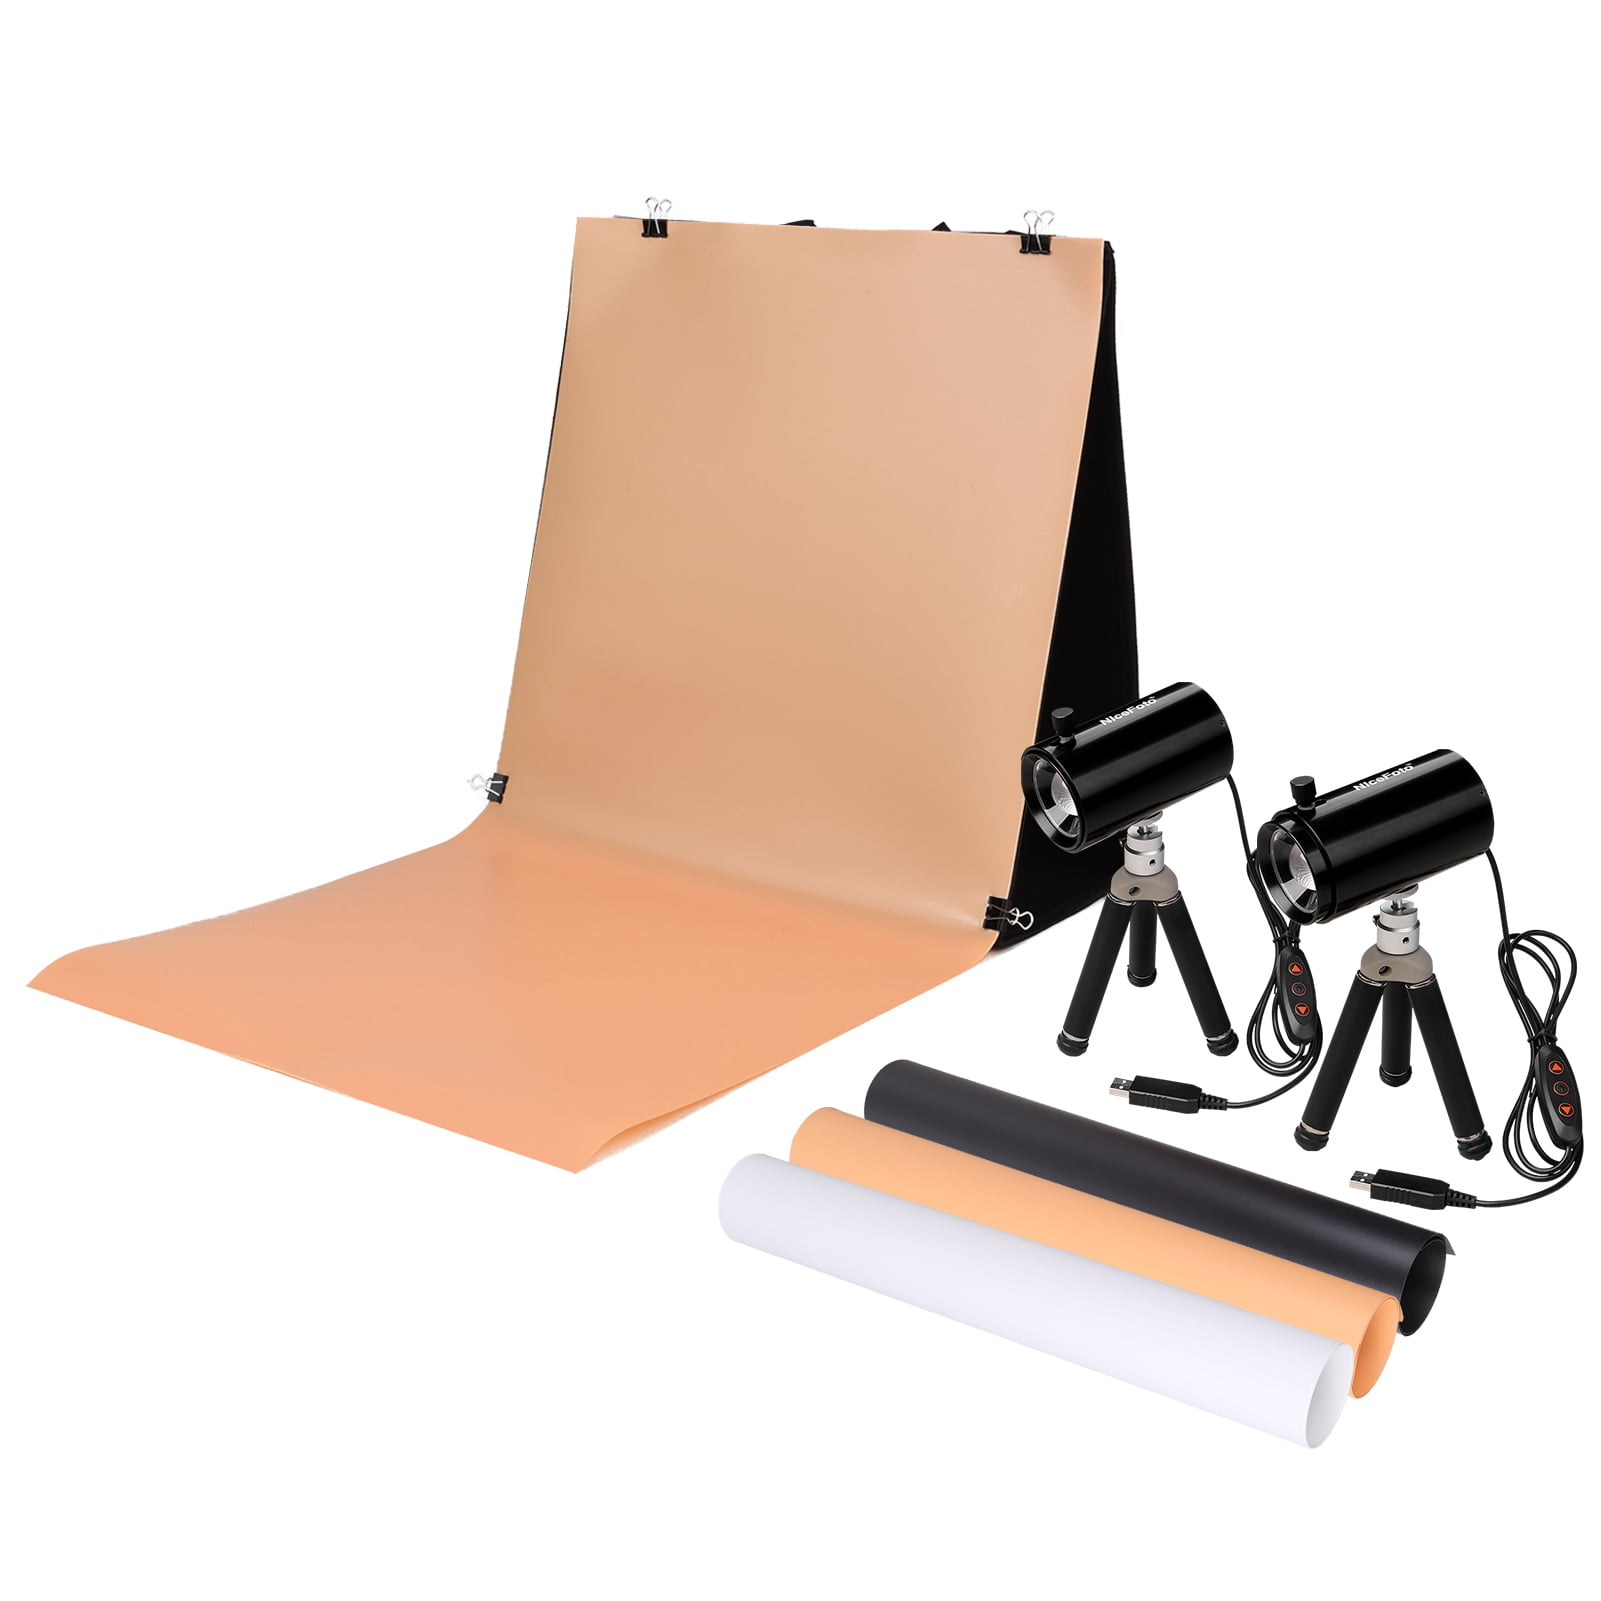 Photo Studio Light Box Photography 27.5 Table Top Shooting Tent Foldable Portable Photo Box with Two 10 in Adjustable Brightness LED Ring Lights,6 Colors Backdrops